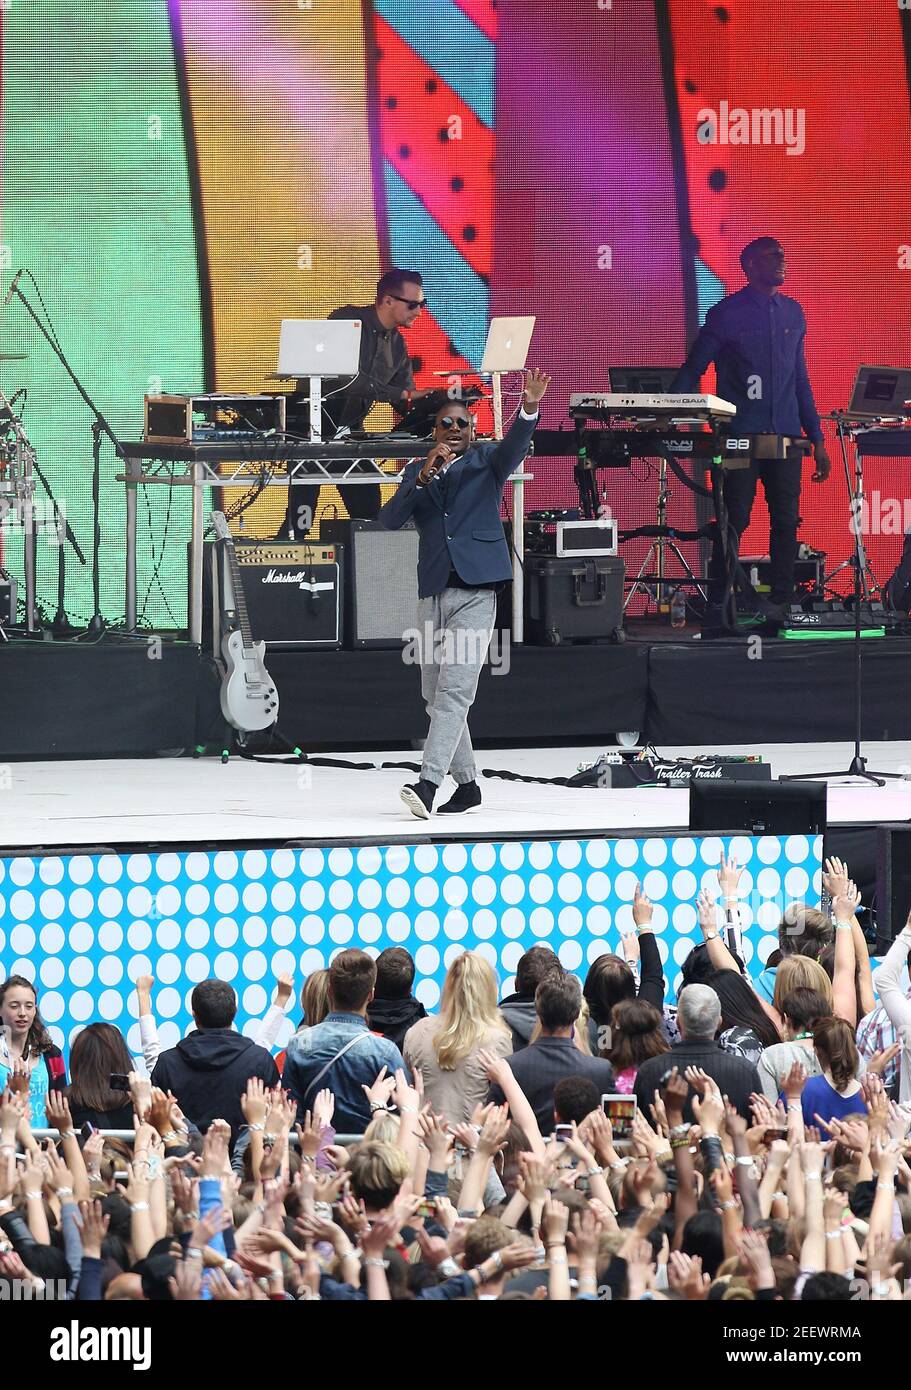 London, UK.  9th June 2013. Labrinth performs on stage at the Capital FM's Summertime Ball at Wembley Stadium, London. Stock Photo